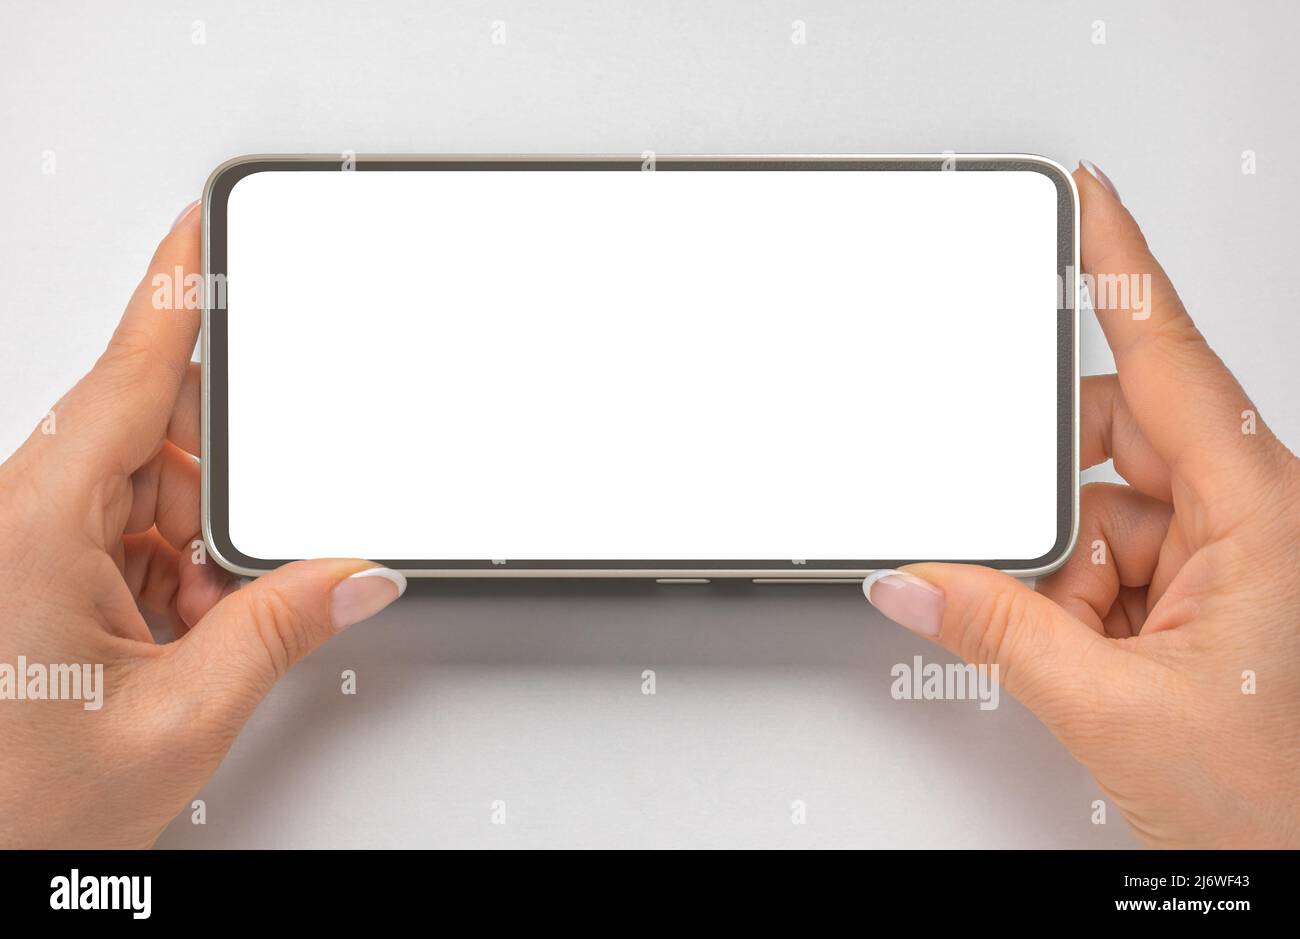 phone mockup in horizontal position. close up hands hold cellphone on gray background. Close up of horizontal black smartphone with blank screen in wo Stock Photo